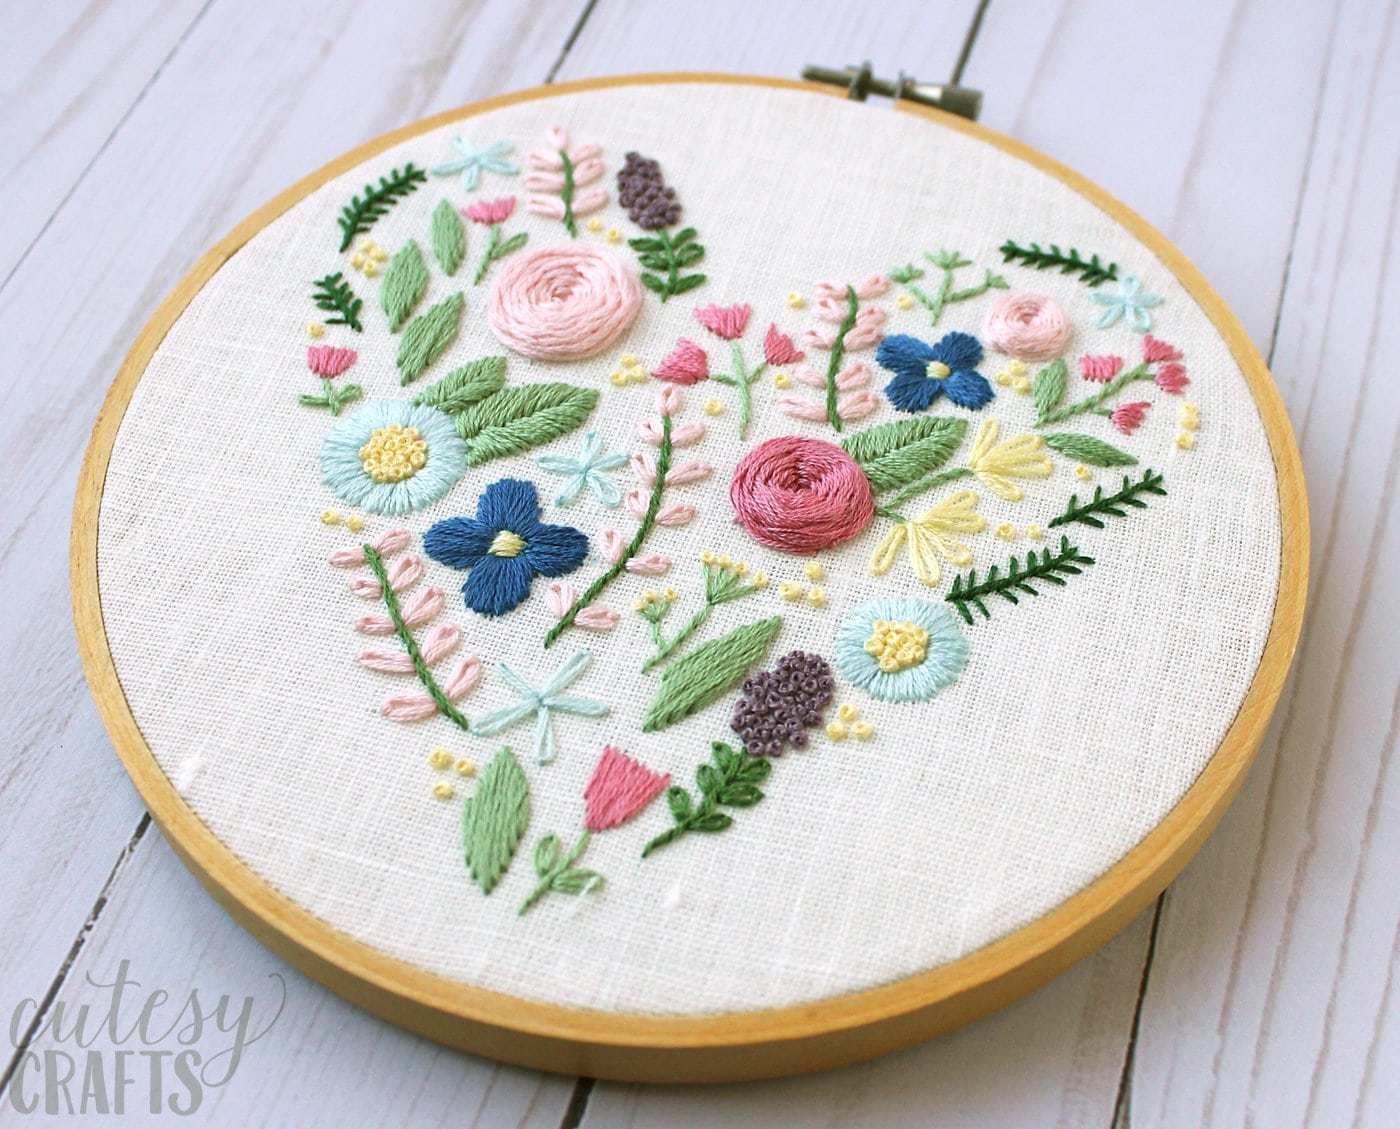 Hand Stitch Embroidery Patterns Floral Heart Hand Embroidery Pattern The Polka Dot Chair